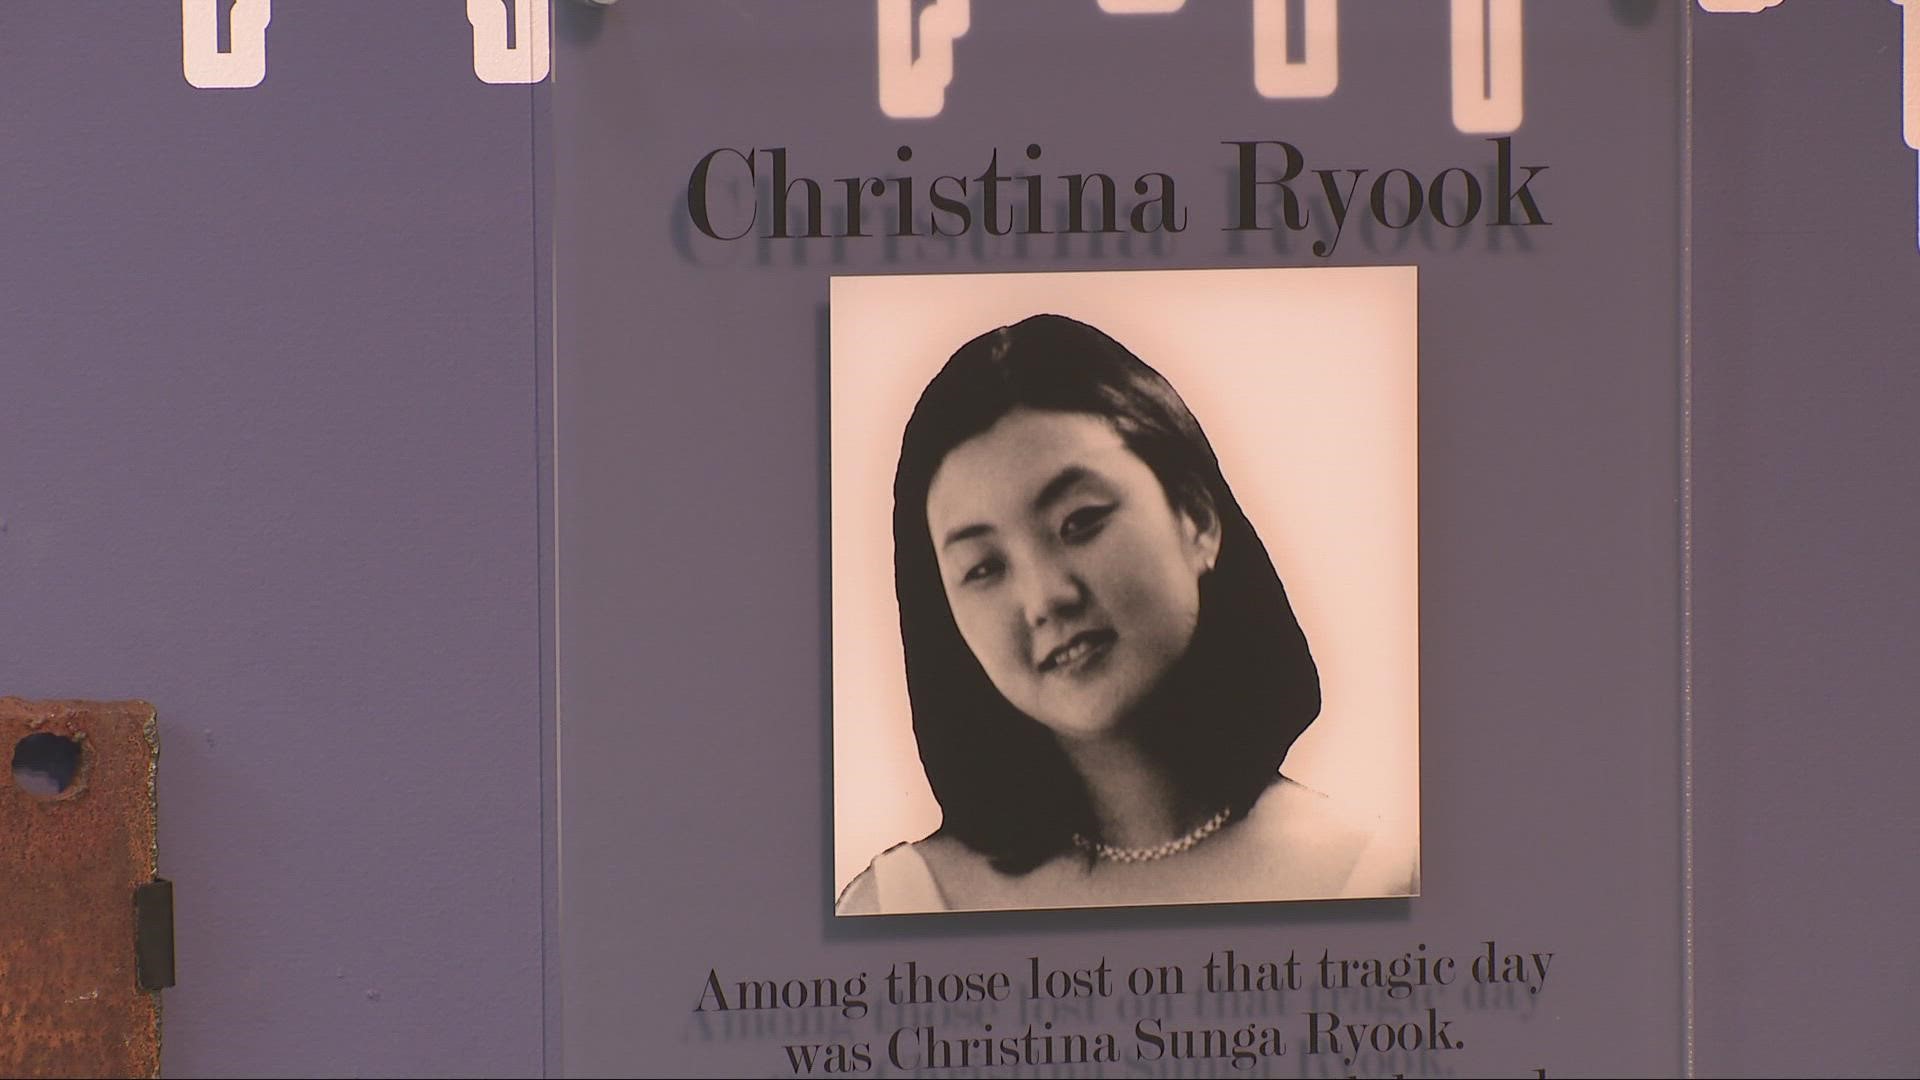 Westlake Porter Public Library dedicated a piece of steel from the World Trade Center in remembrance of Christina Ryook, who passed away 21 years ago 9/11.